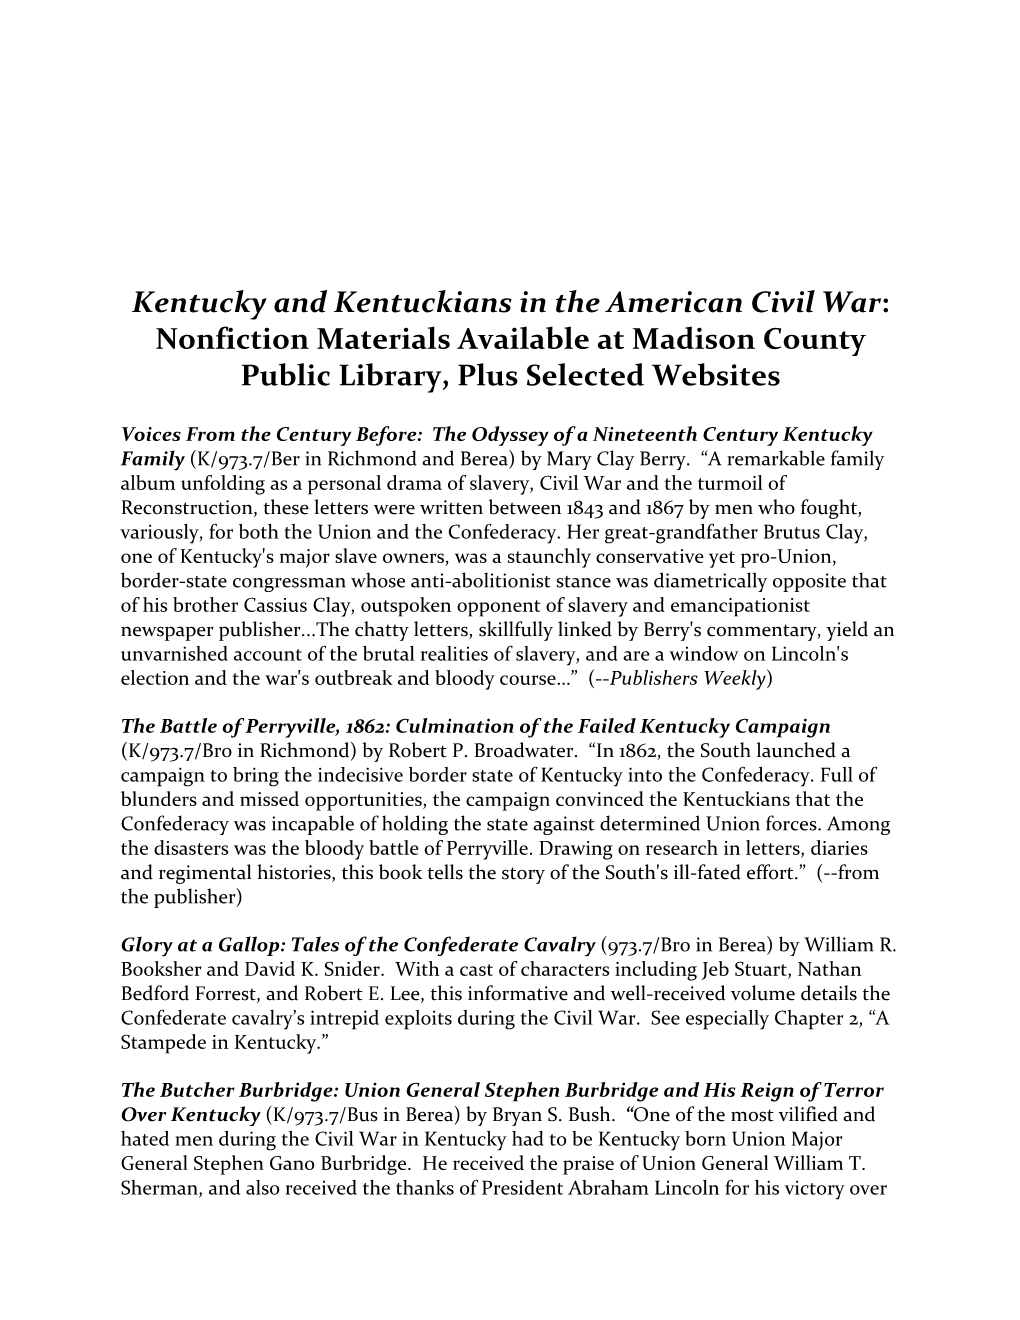 Kentucky and Kentuckians in the American Civil War: Nonfiction Materials Available at Madison County Public Library, Plus Selected Websites